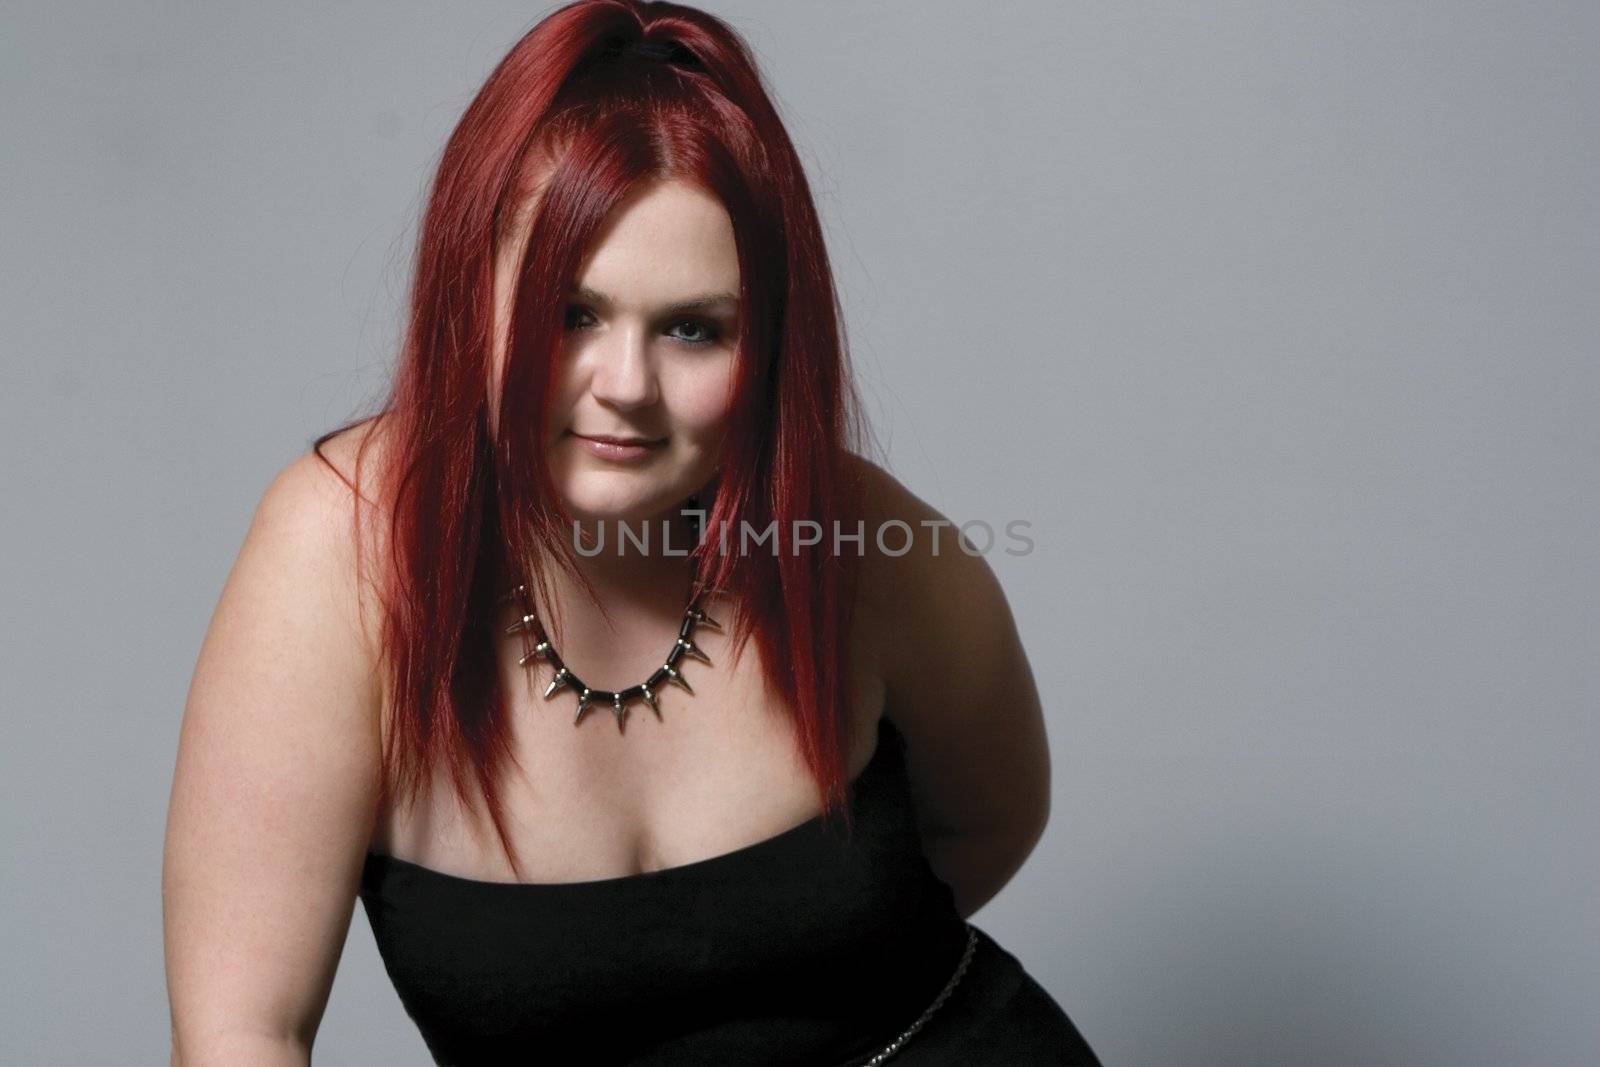 Goth rock red hair chick by mypstudio